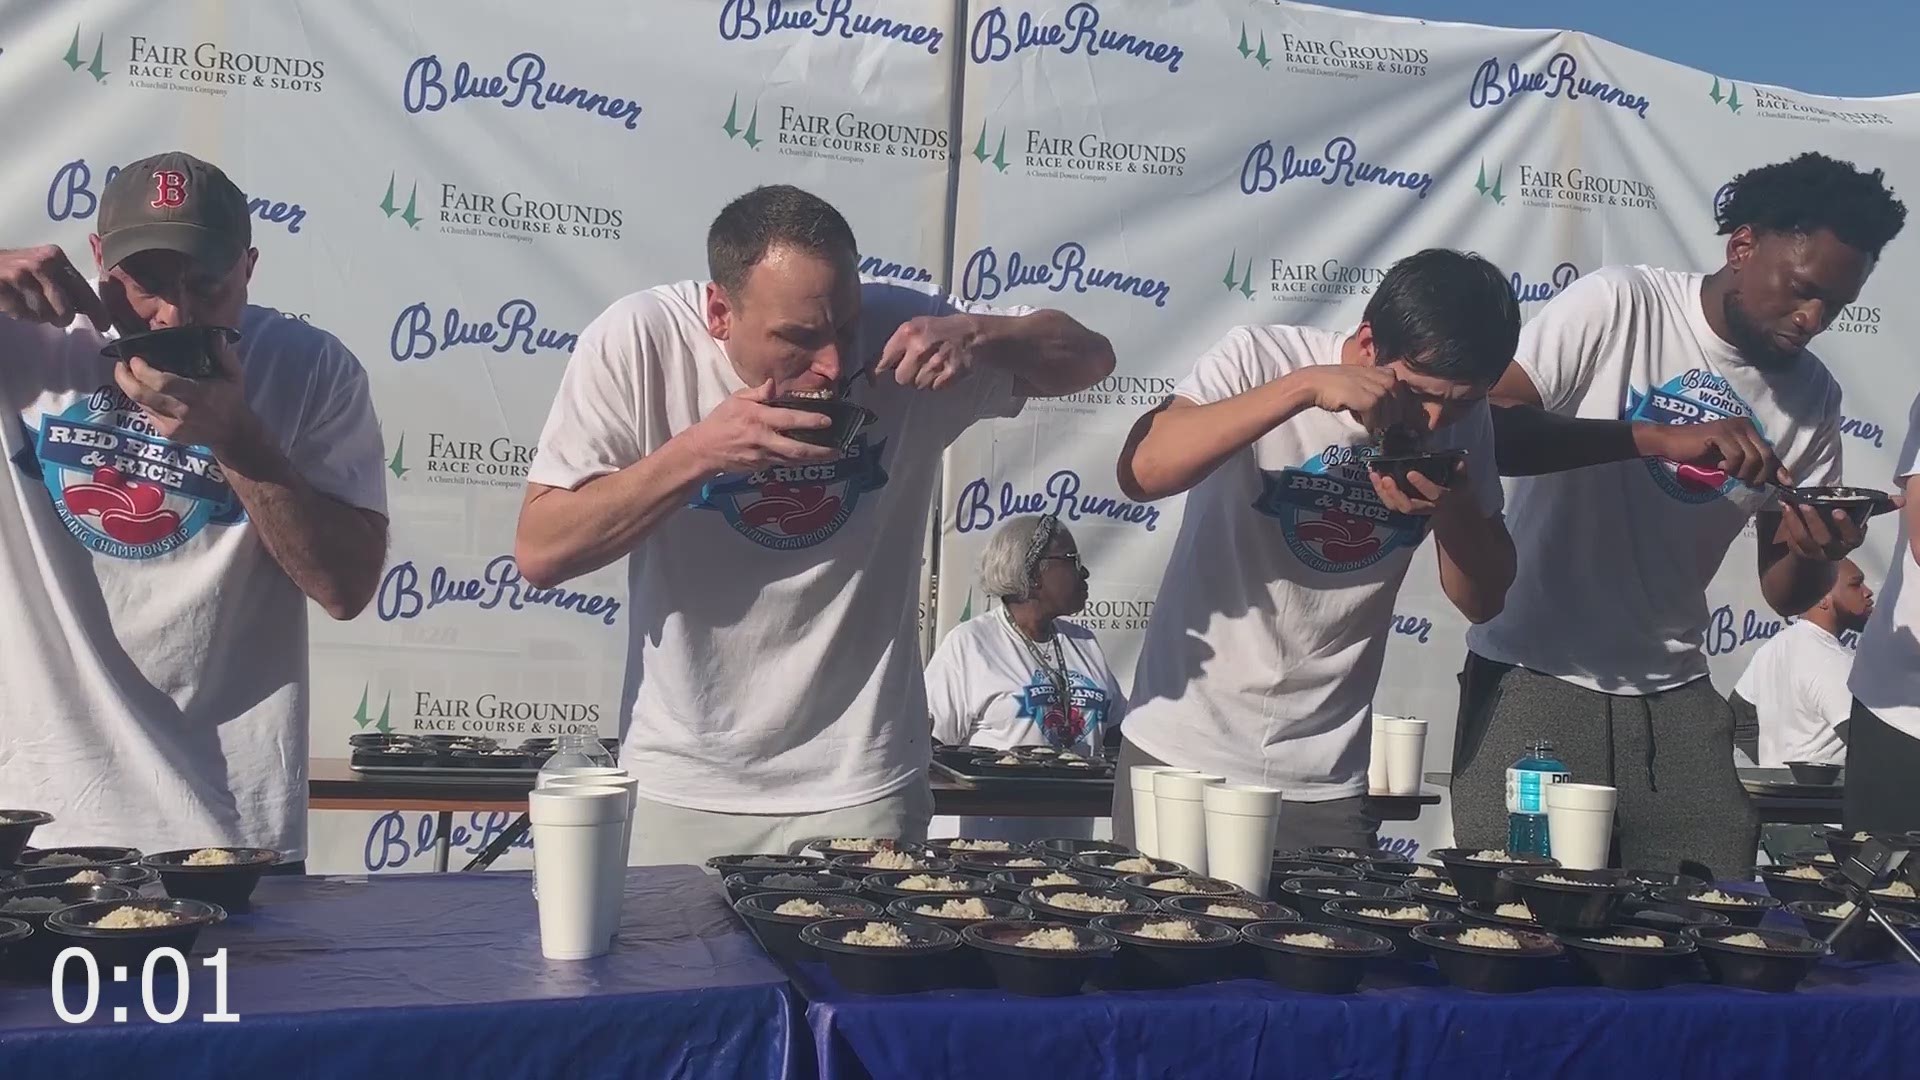 Joey Chestnut eating a bowl of red beans and rice in 7 seconds